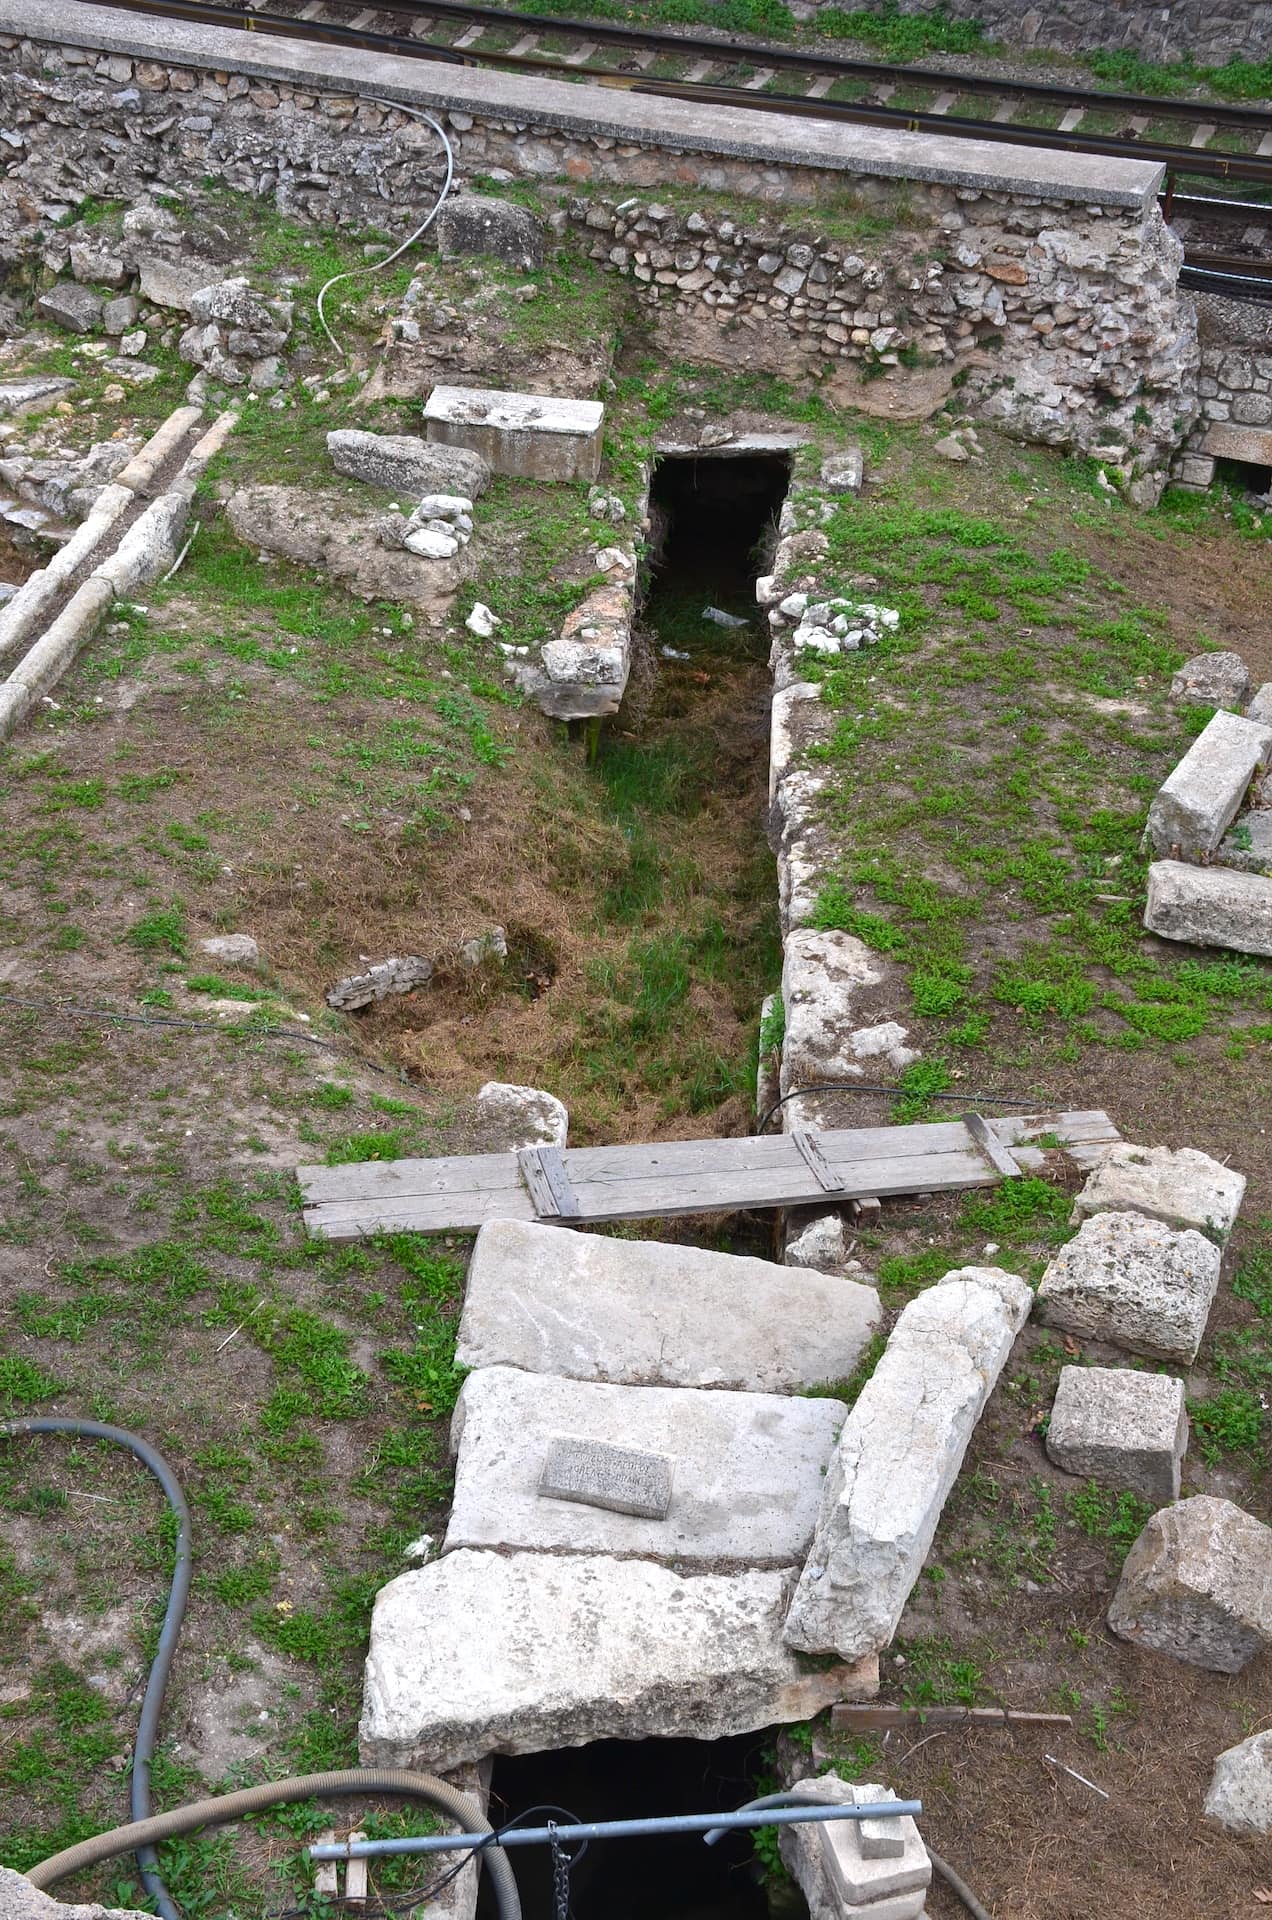 Great Drain running in front of the Stoa Basileios at the Ancient Agora of Athens